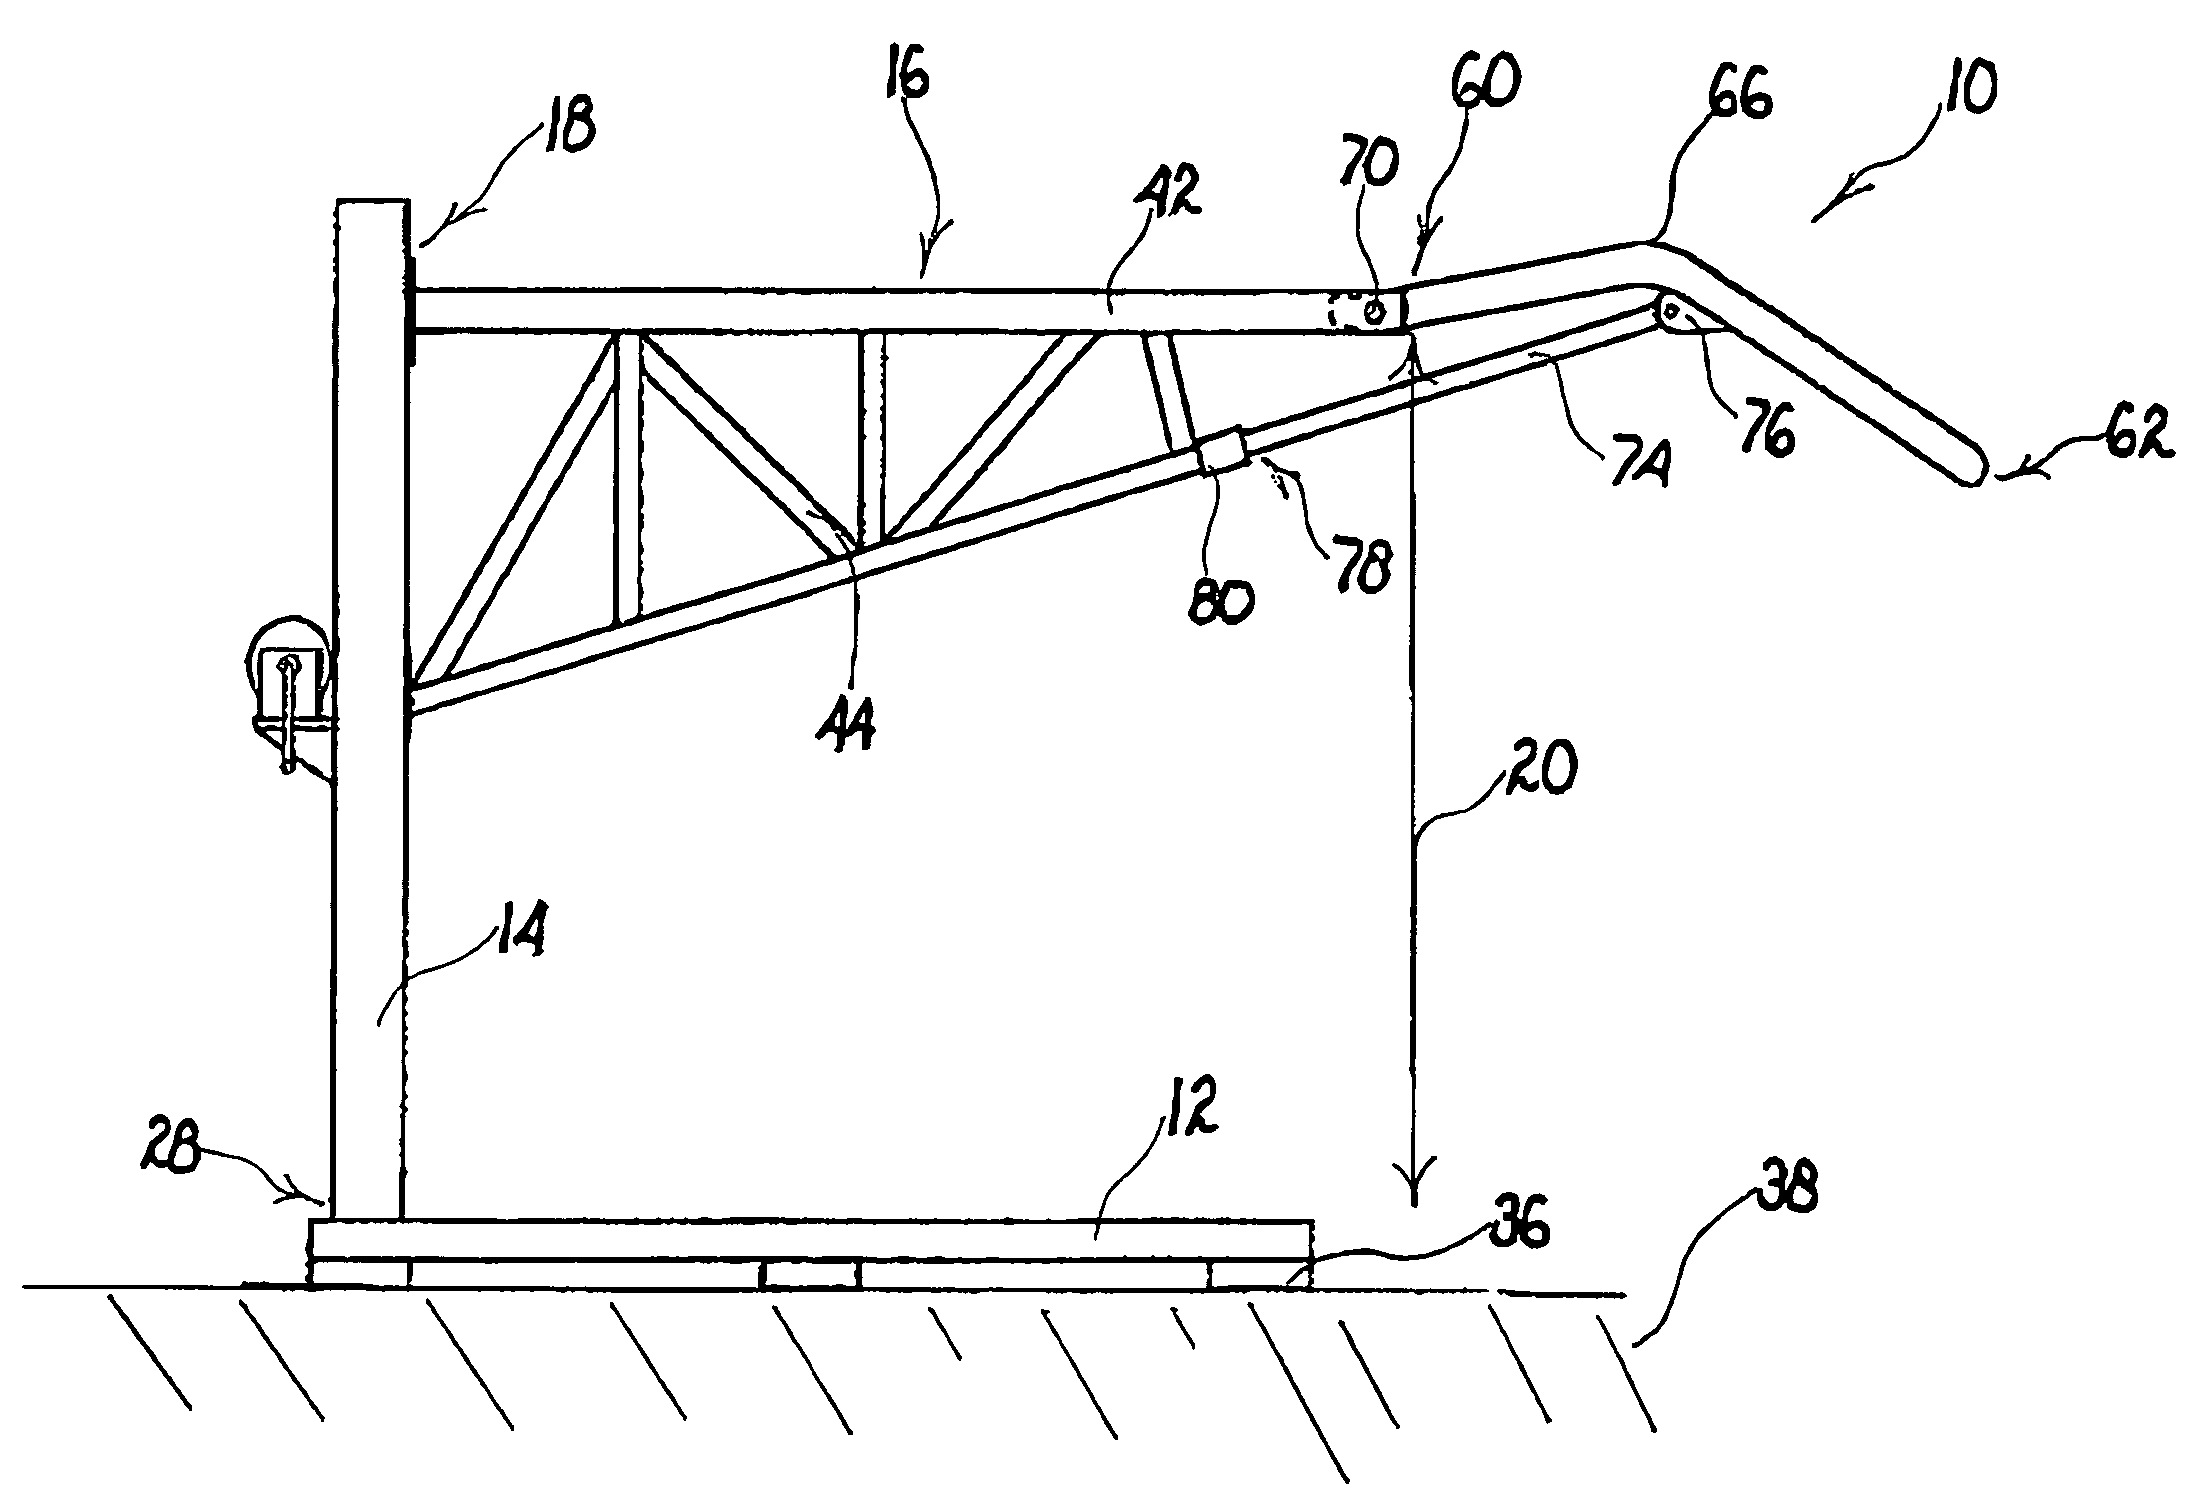 Apparatus for use with coiled barrier material